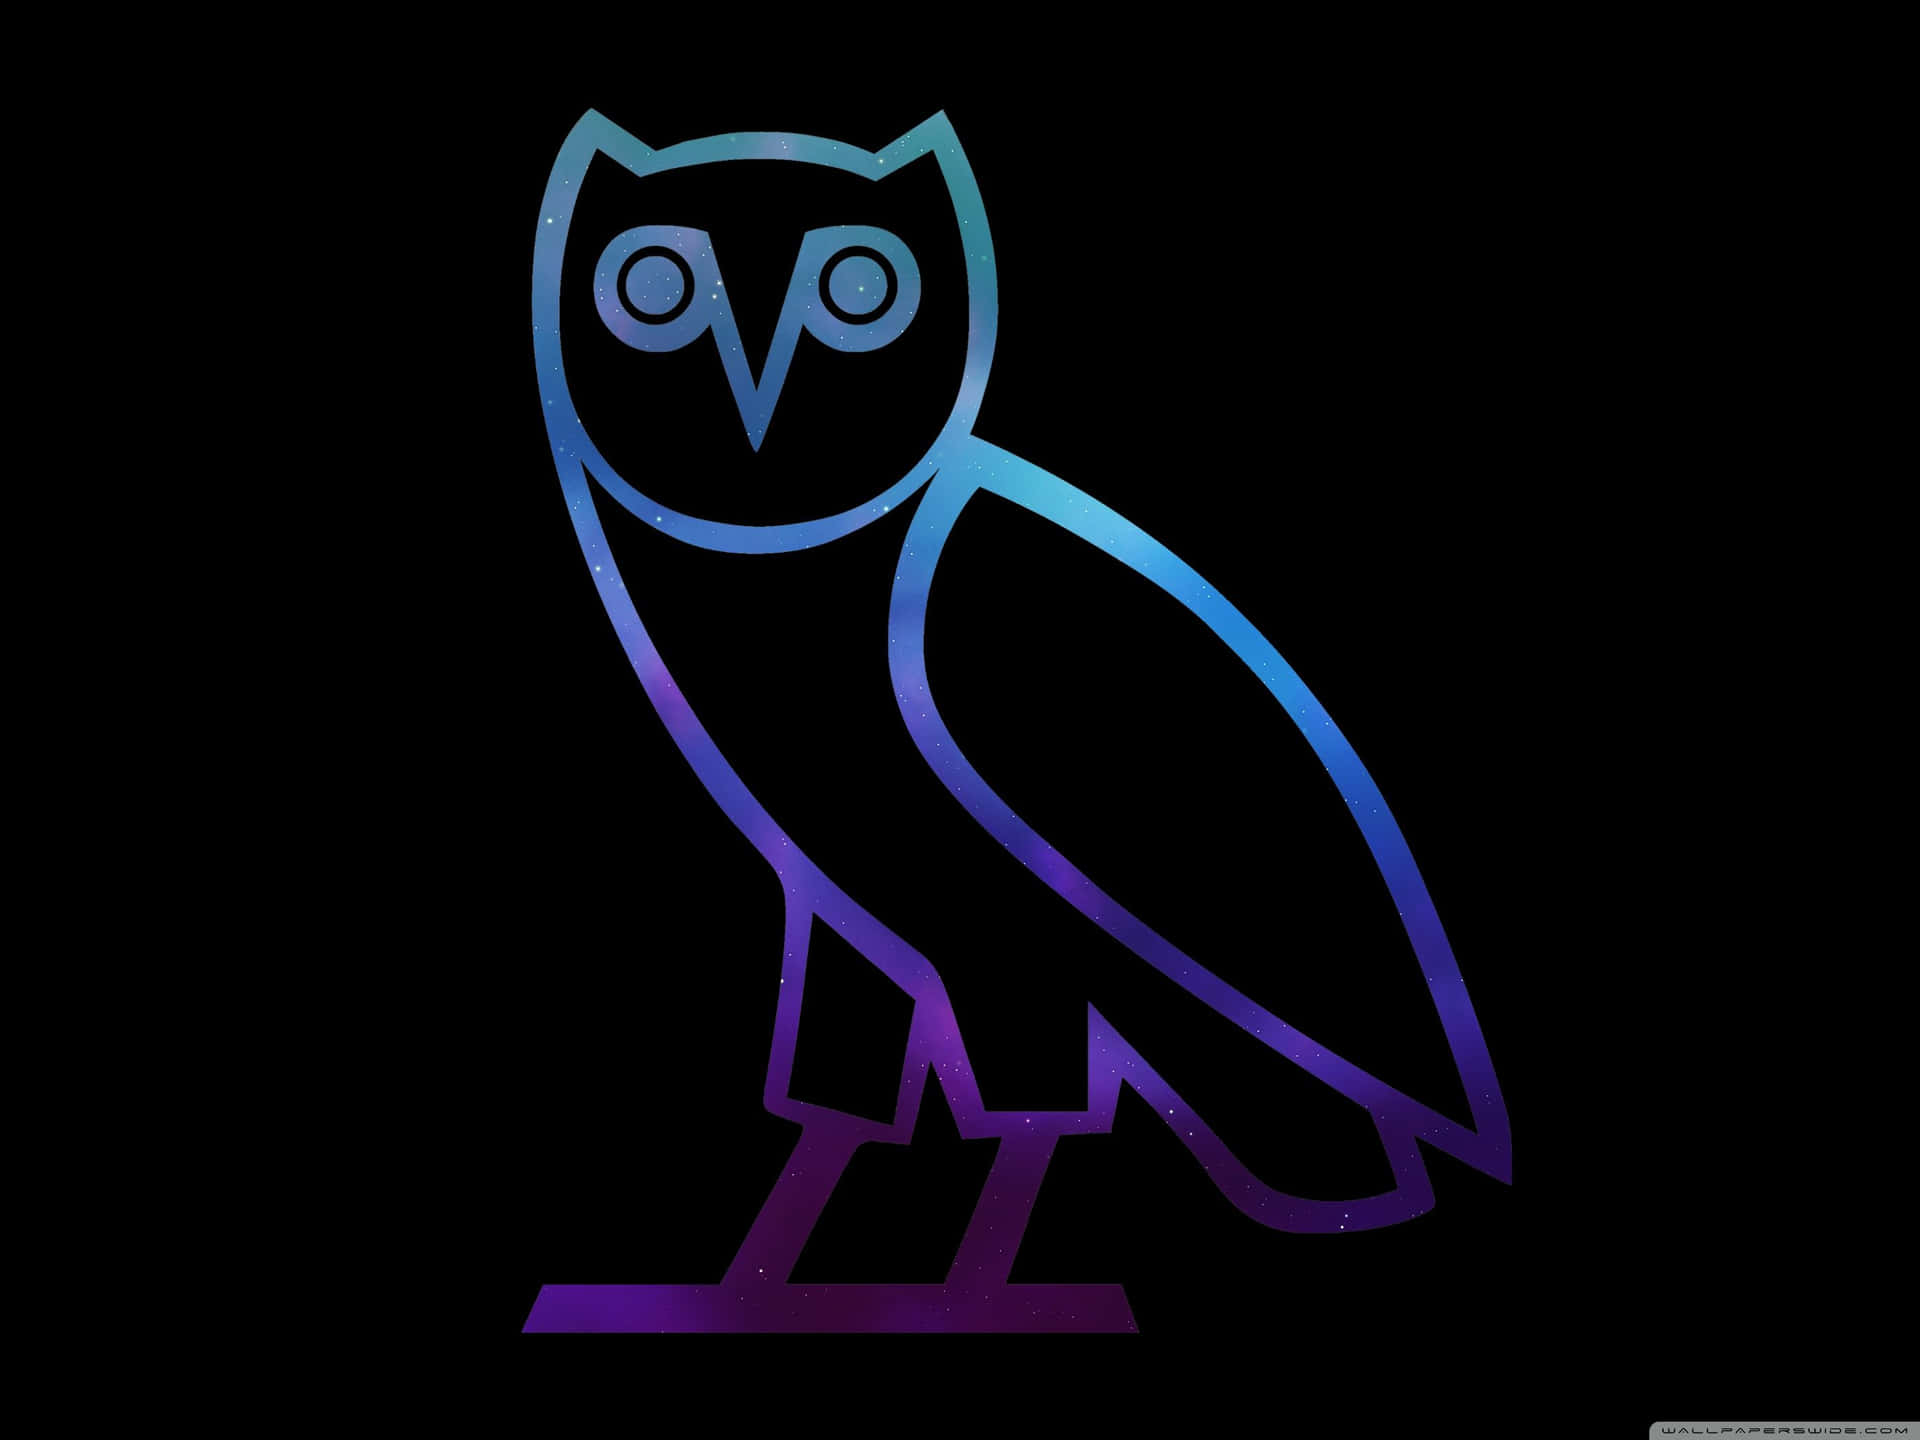 Be At The Forefront of Trends with Drake, OVO and the Iconic Owl Wallpaper